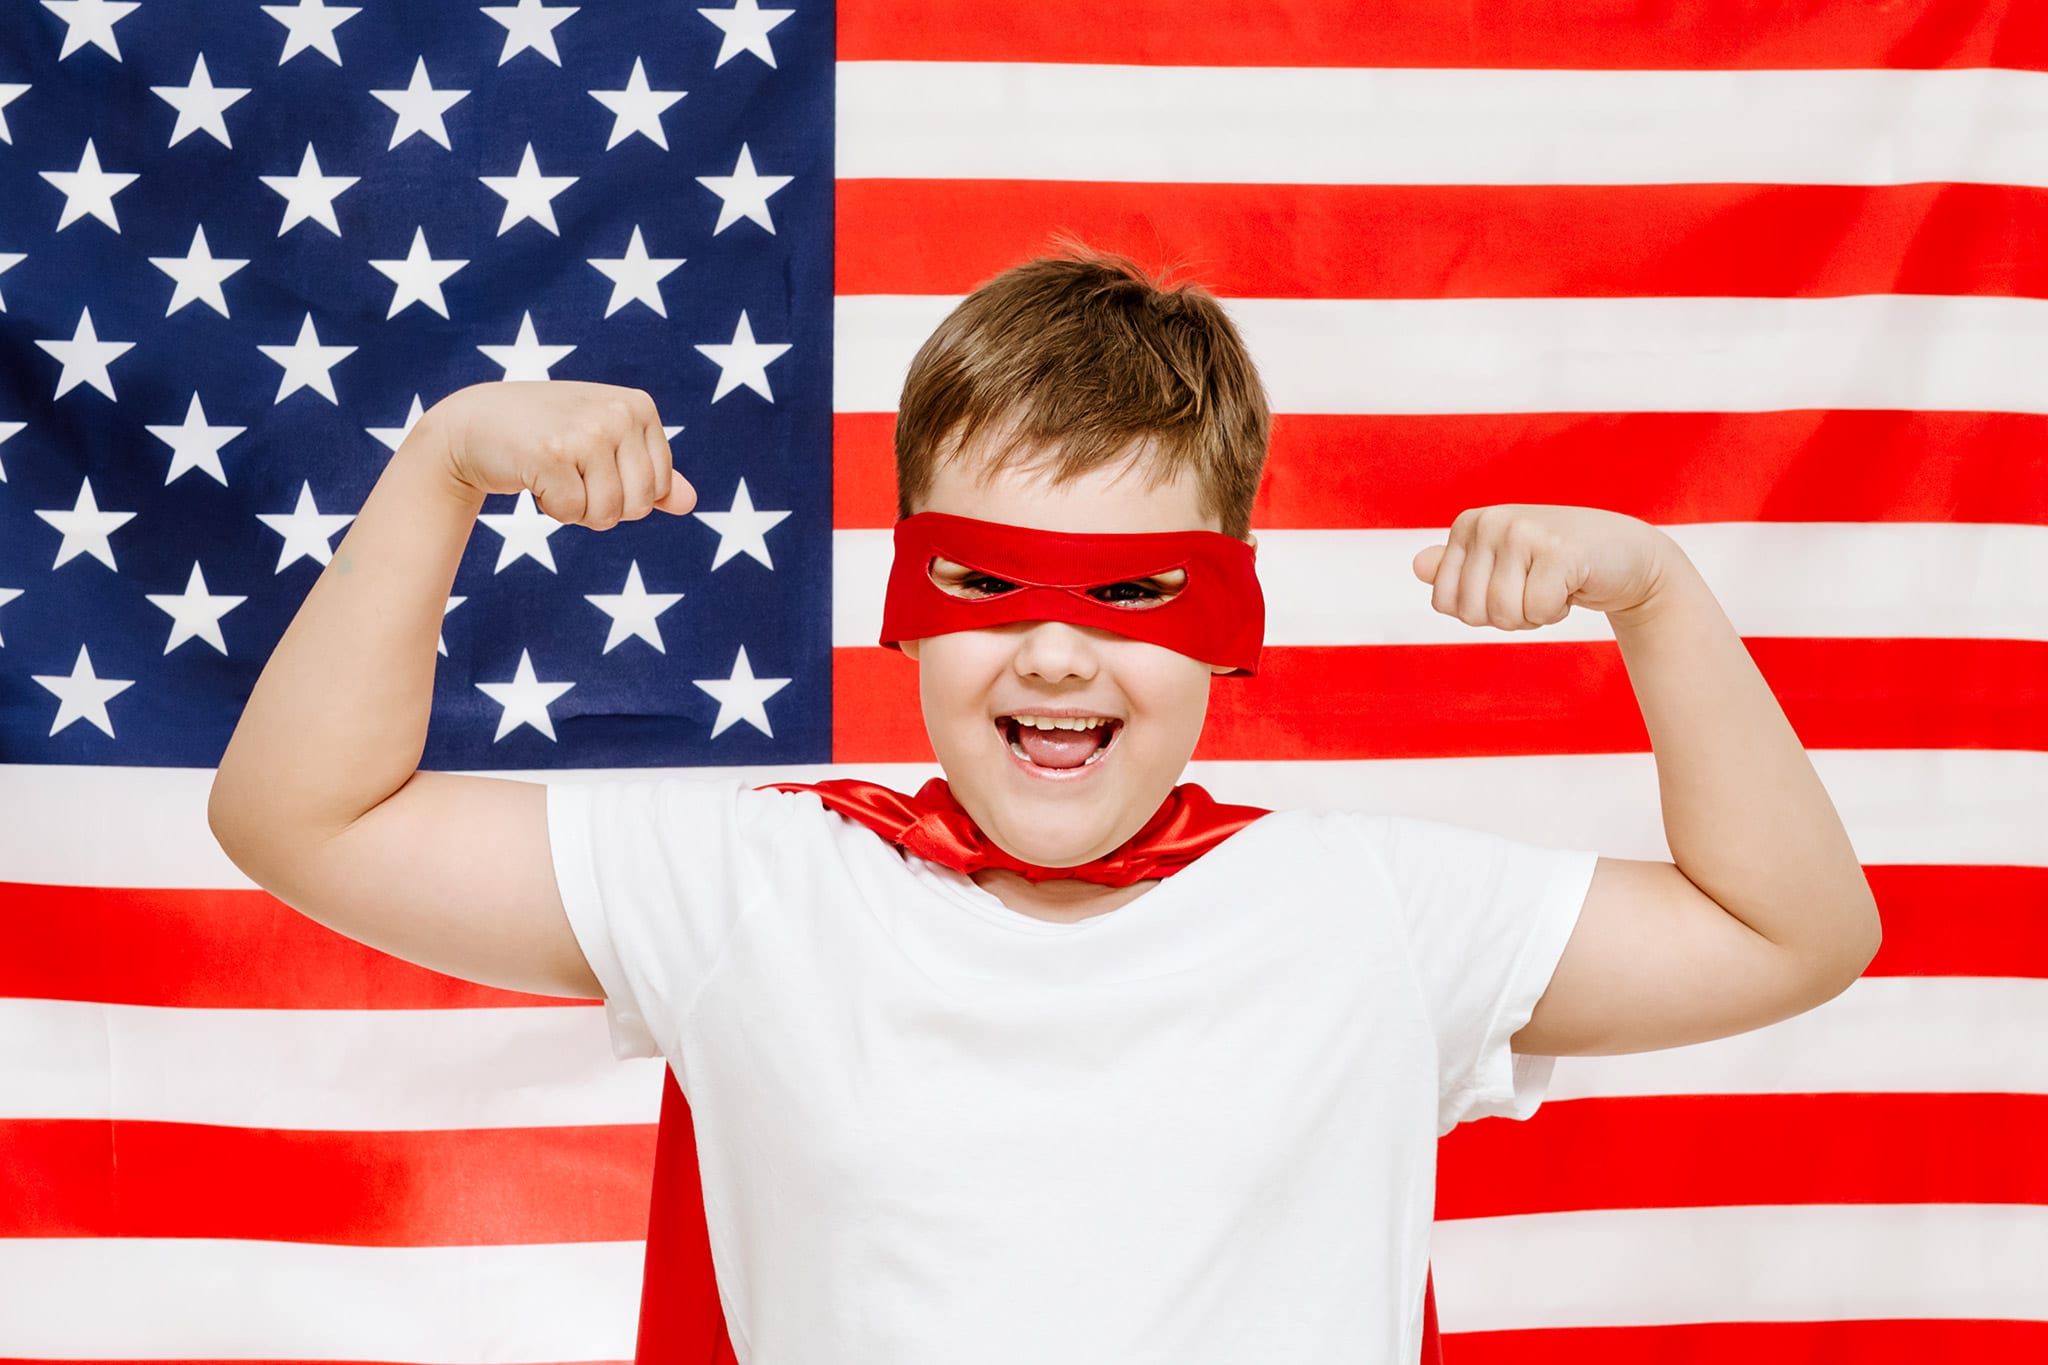 Boy in a superhero outfit in front of the United States flag